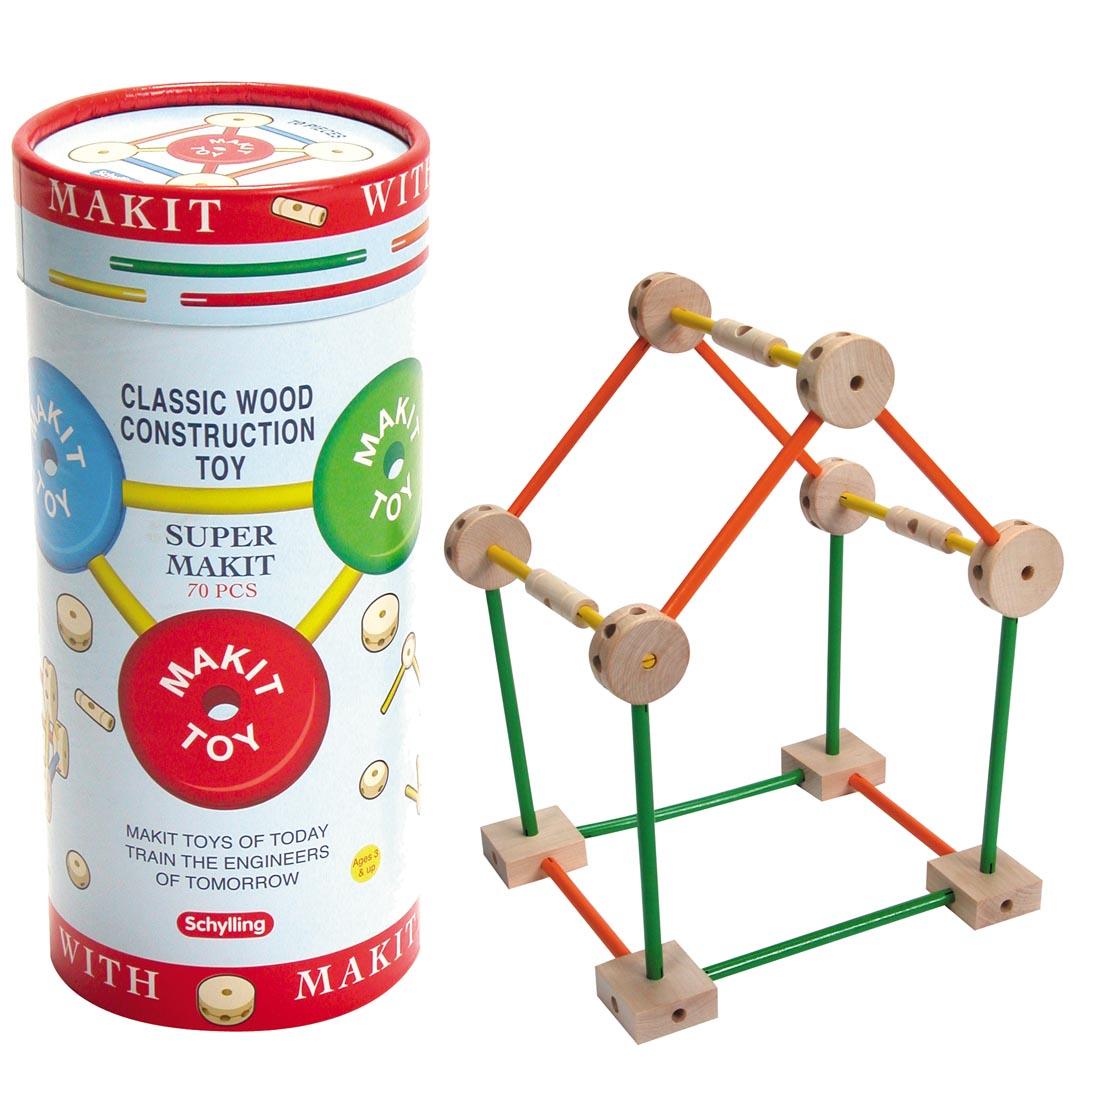 Super Makit Classic Wood Construction Toy Package beside a structure built with the pieces